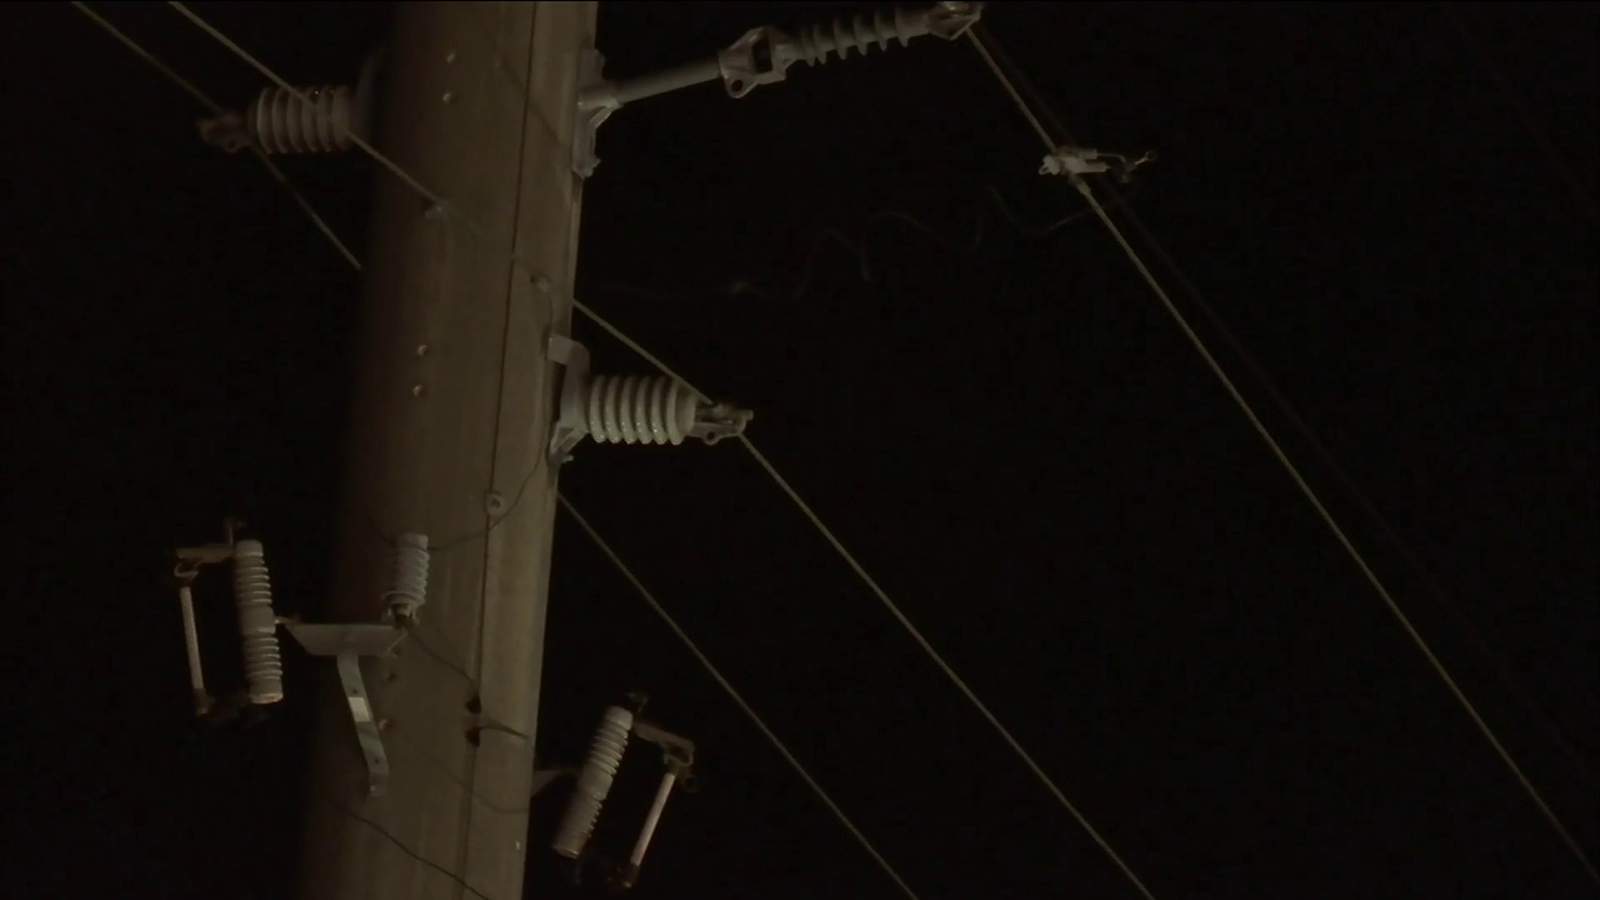 Two workers were injured in a Fernandina Beach power line accident